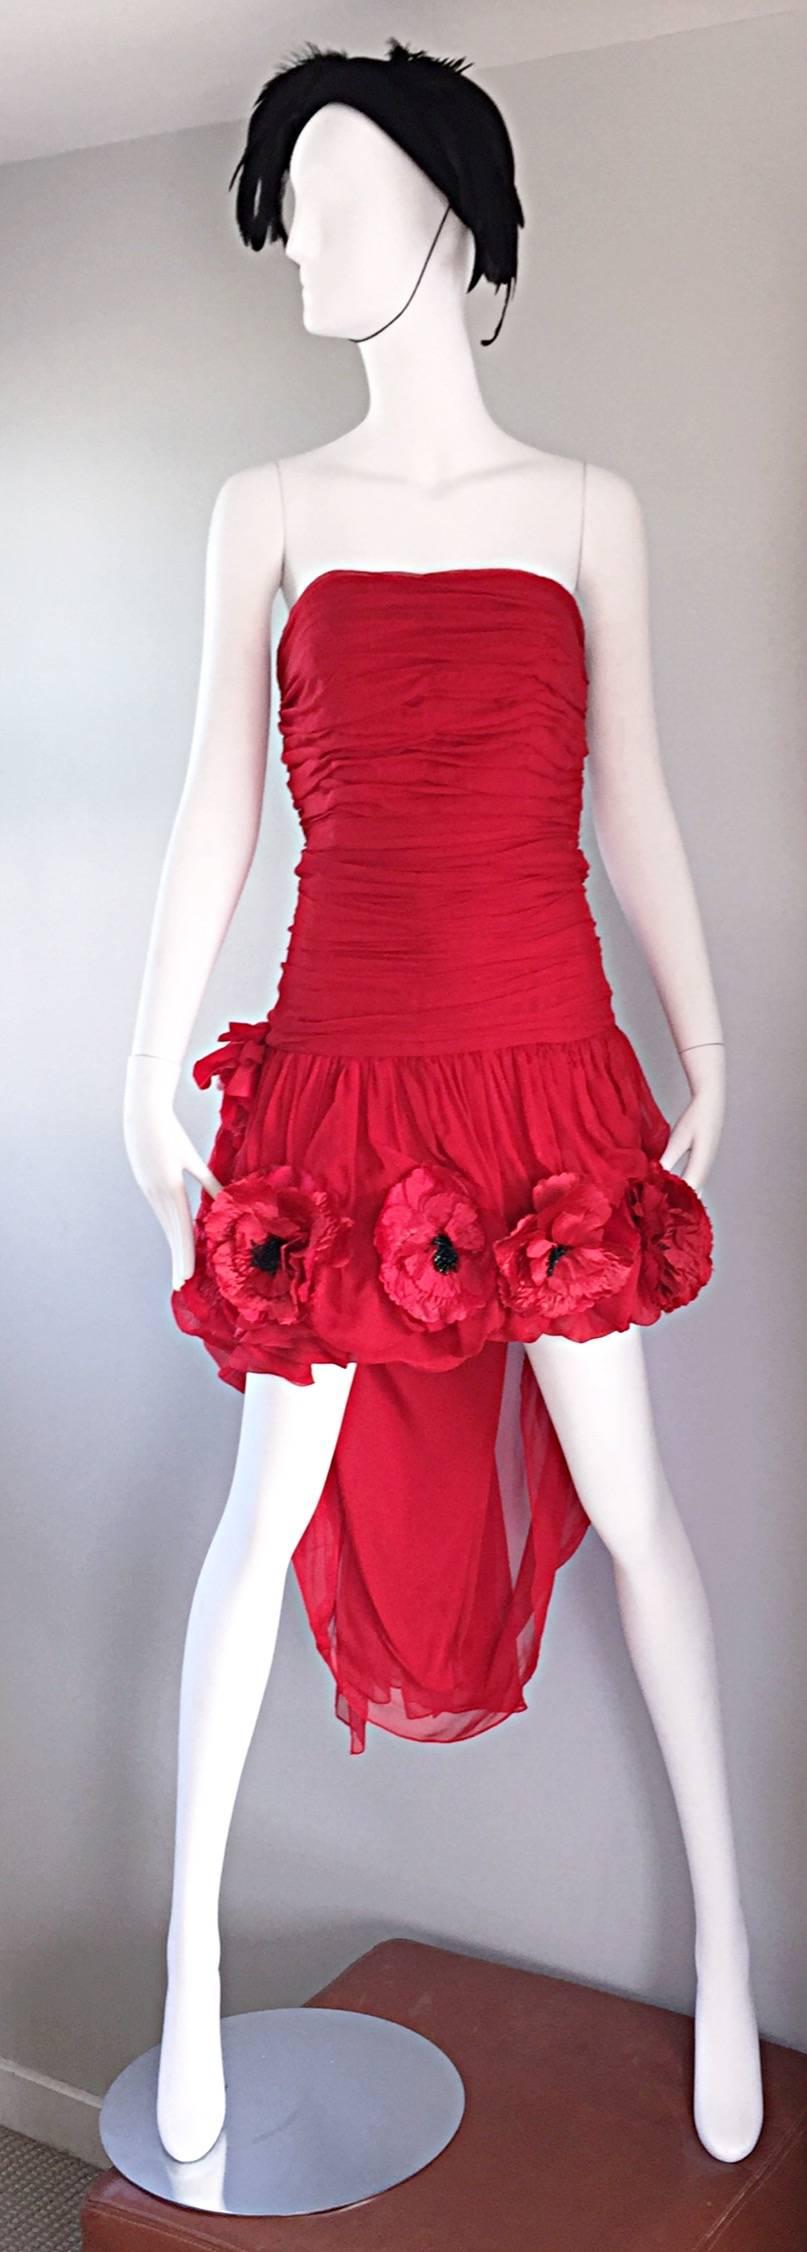 Vintage CHRISTIAN LACROIX red silk chiffon Hi-Lo strapless cocktail dress! Features a ruched fitted boned bodice, with a flirty chiffon skirt. Bead encrusted poppy flowers are sewn onto the hem of the skirt on the front and back. Self tying sash at